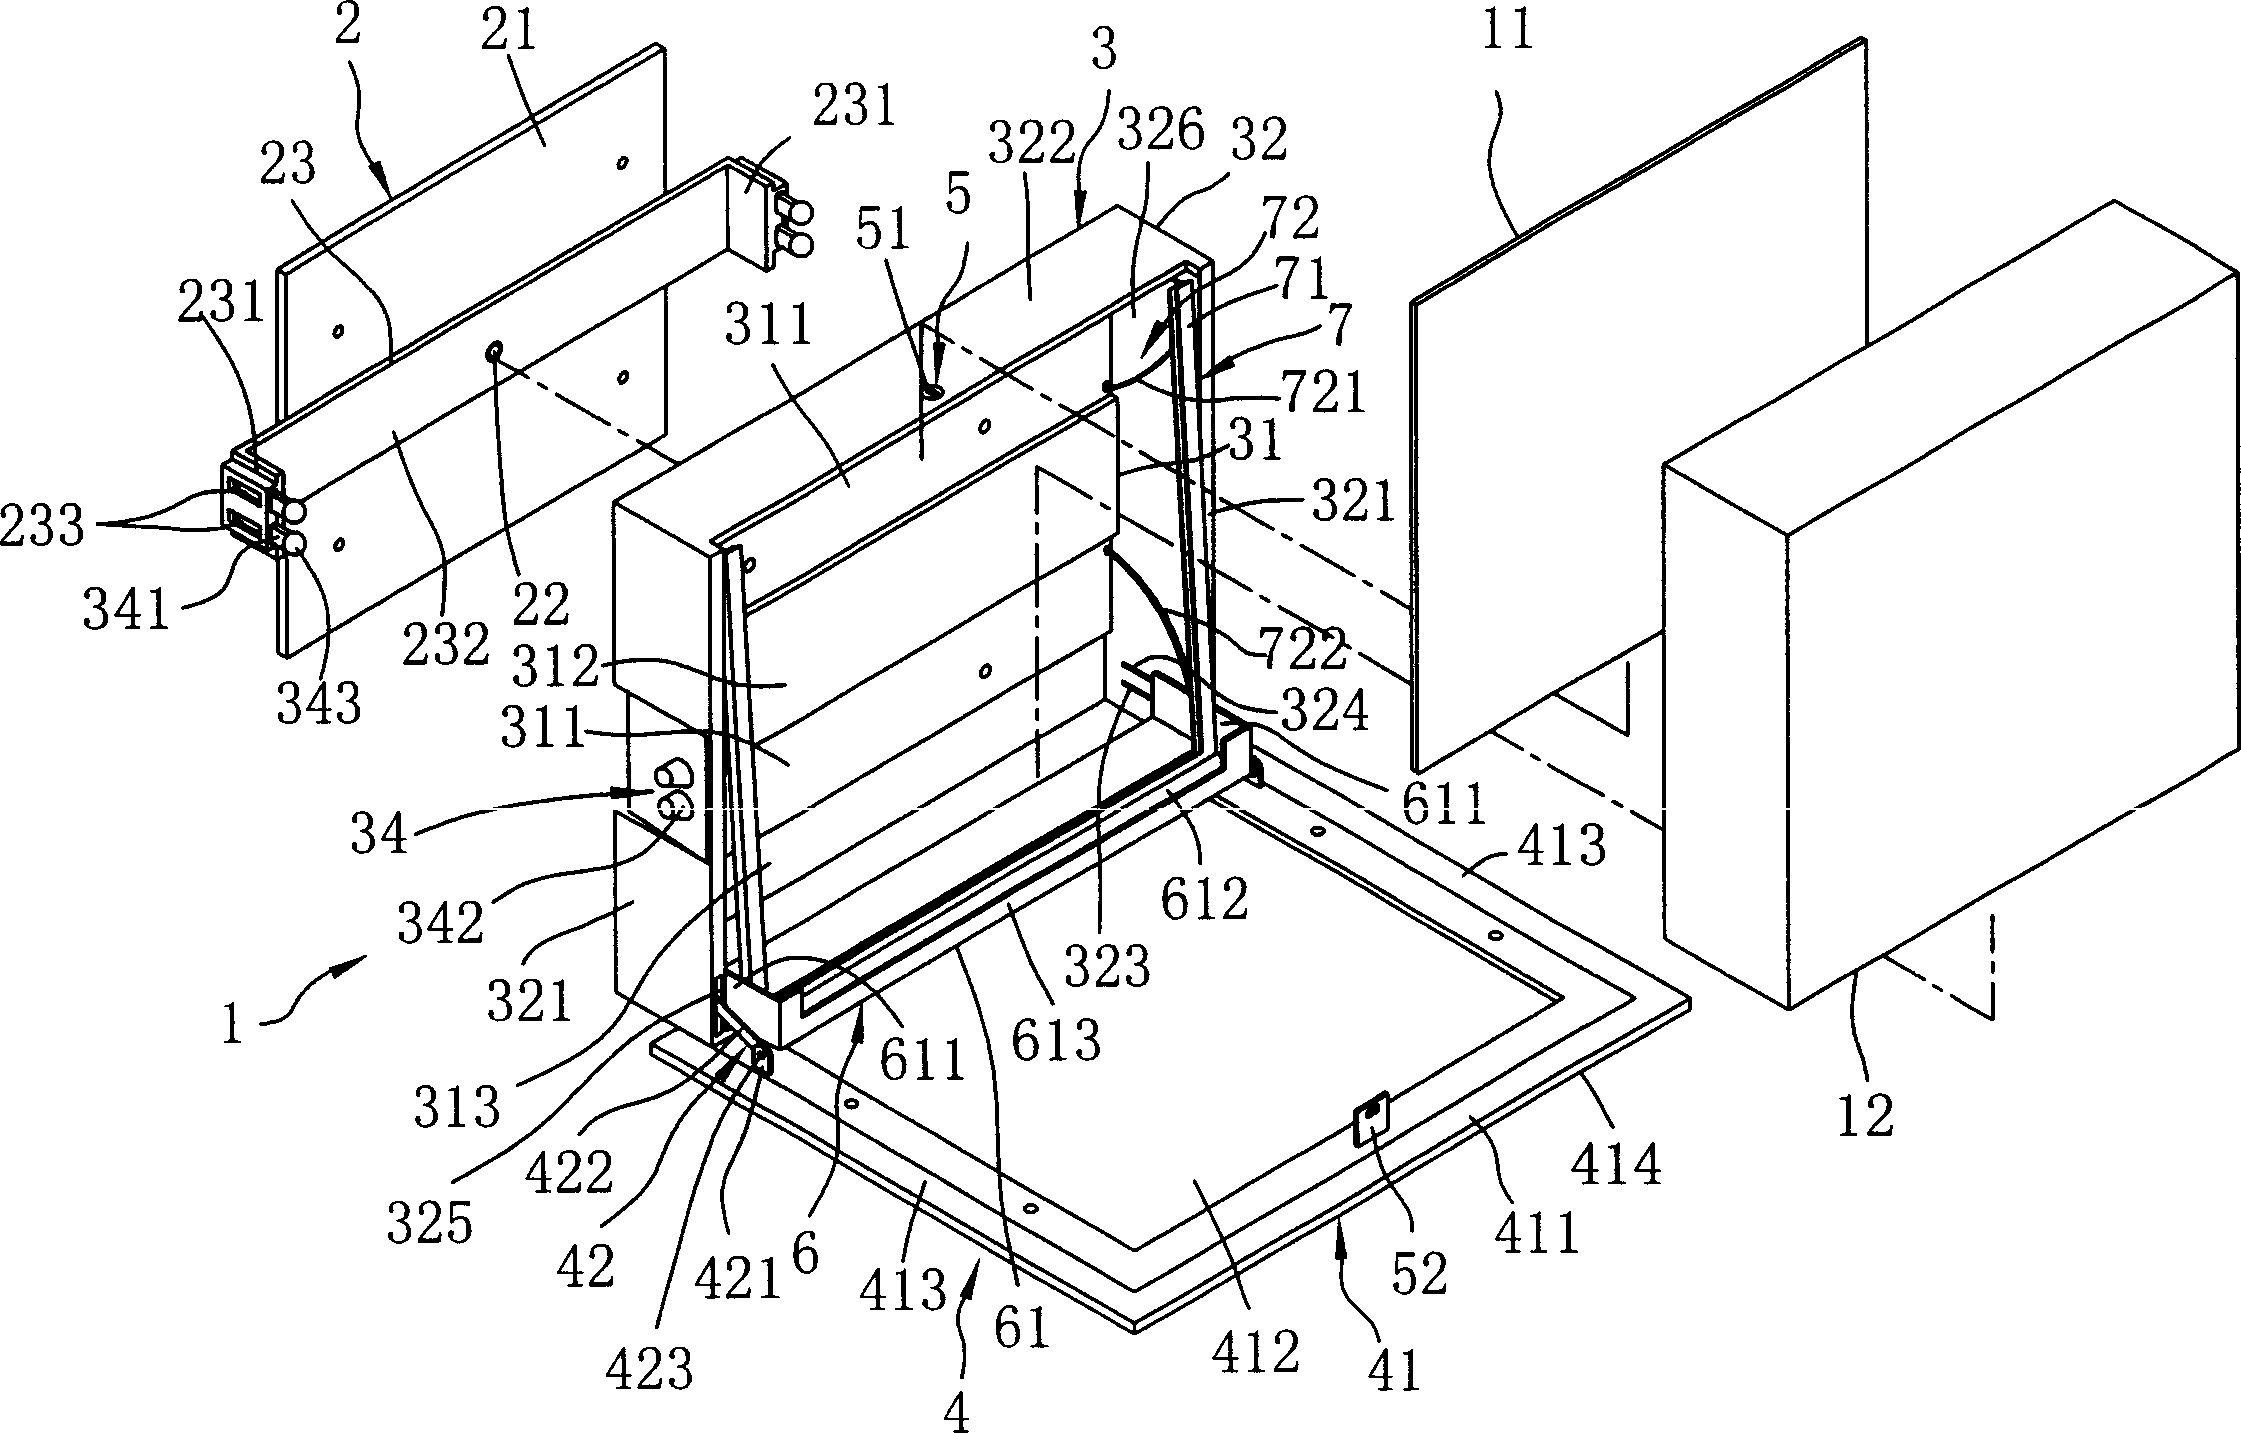 Photoframe capable of putting digit image device